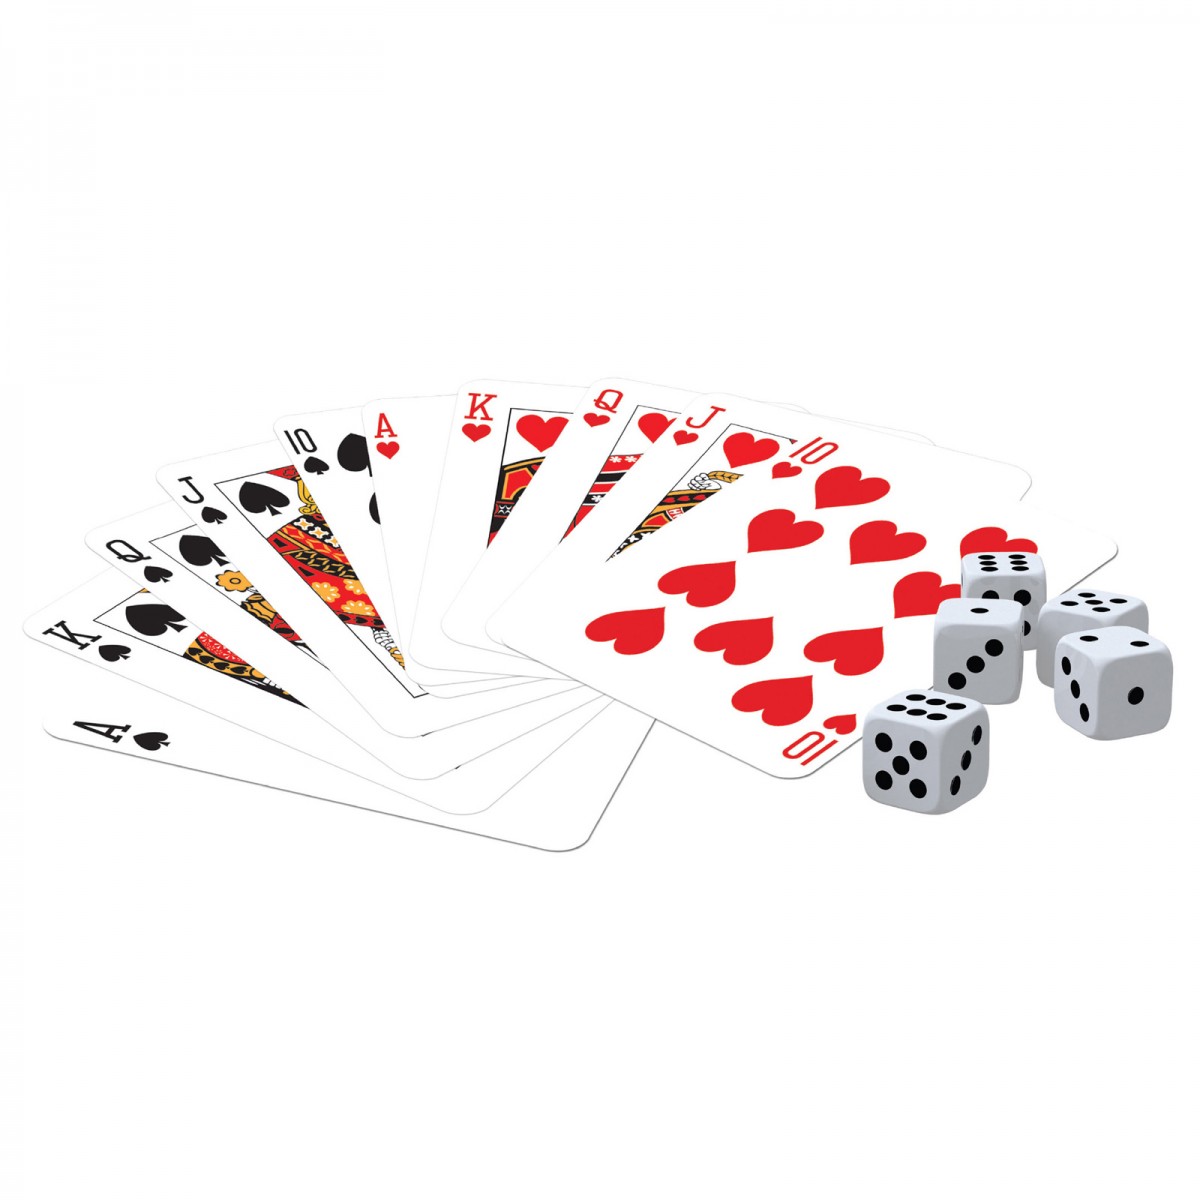 Classic Games Collection - 2 Decks Playing Cards & 5 Dice - Products